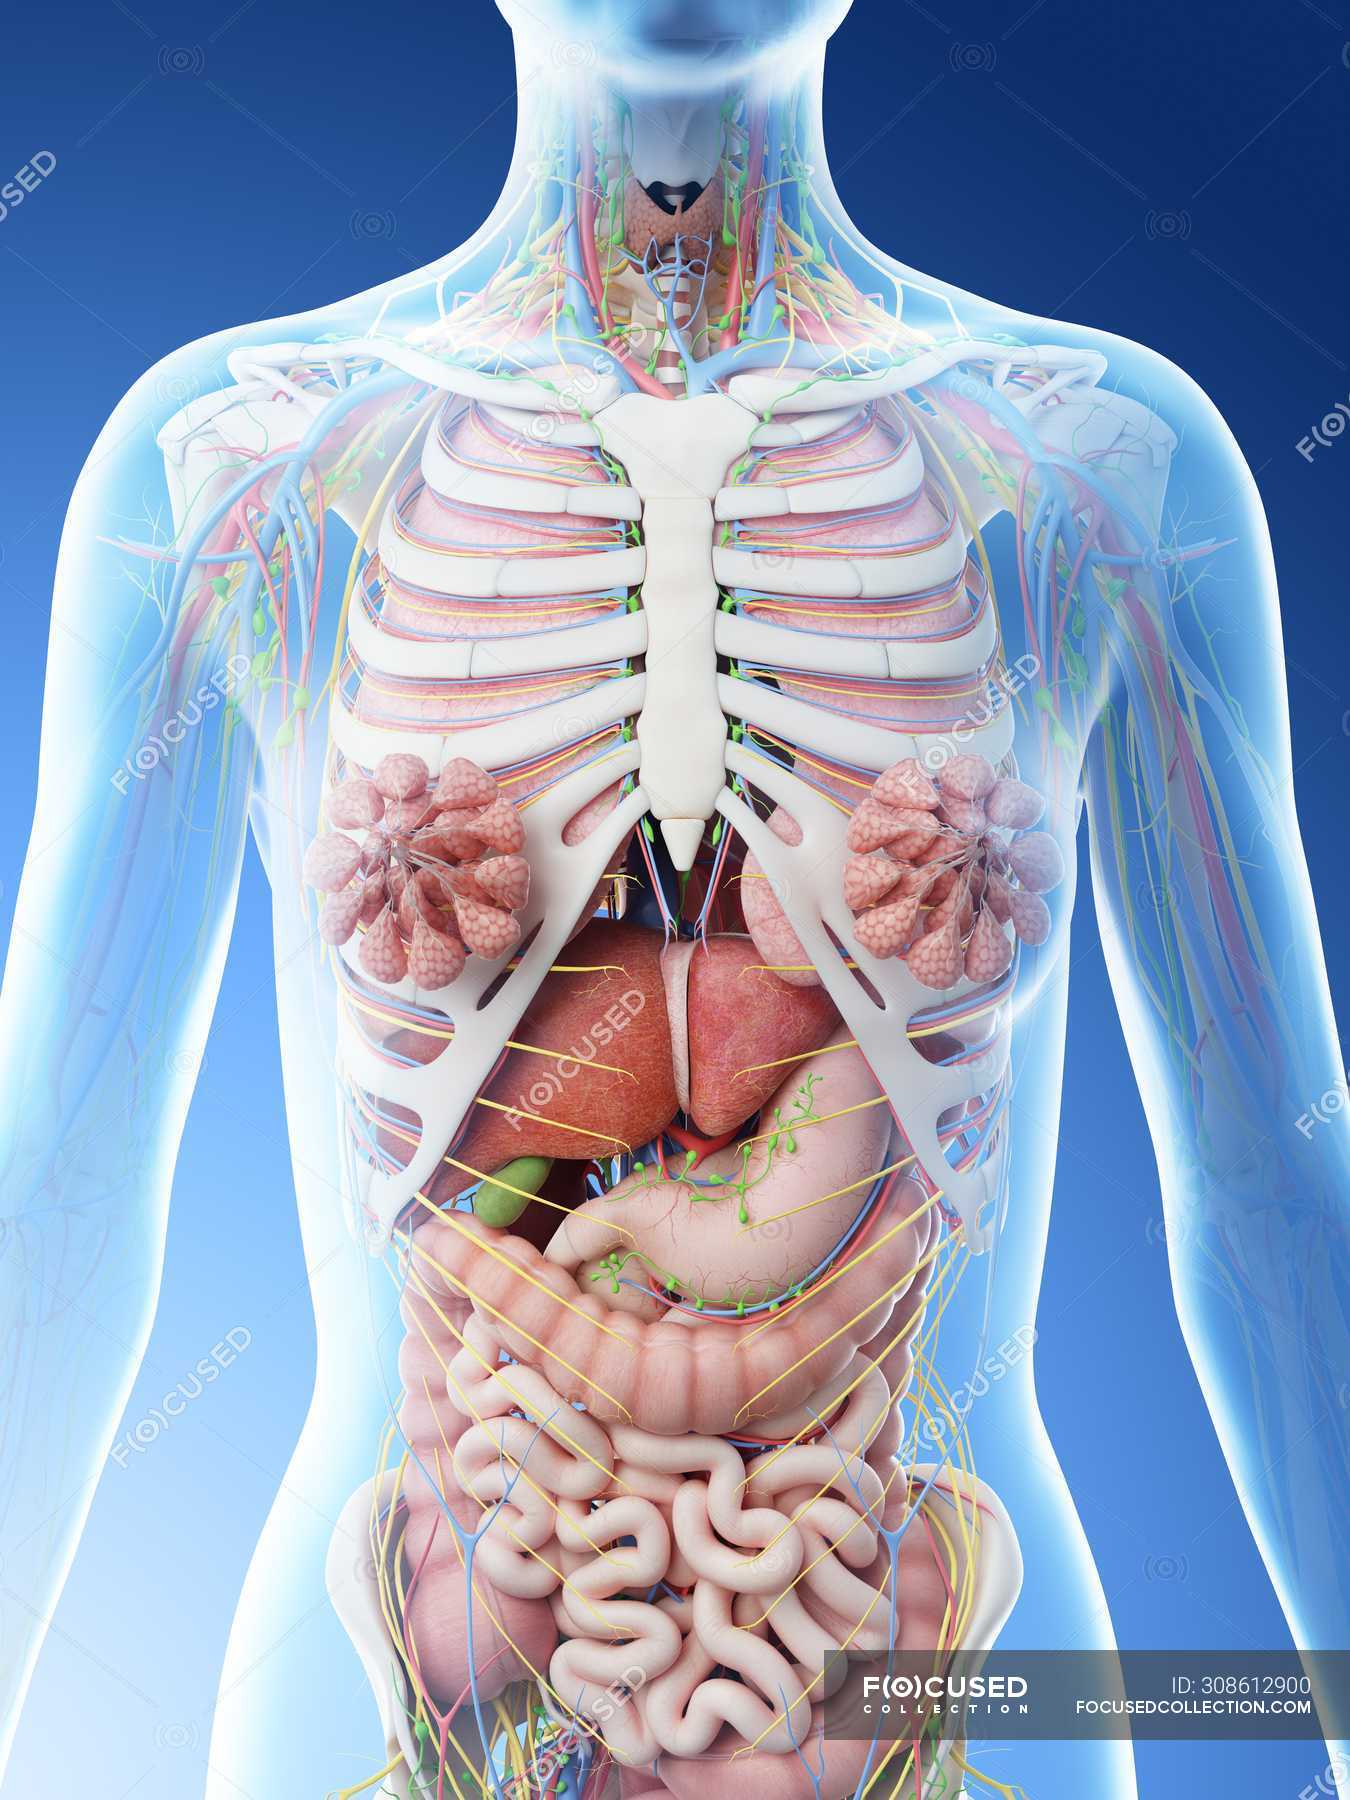 Female Upper Body Anatomy And Internal Organs Computer Illustration 3d Rendering Blue Background Stock Photo 308612900